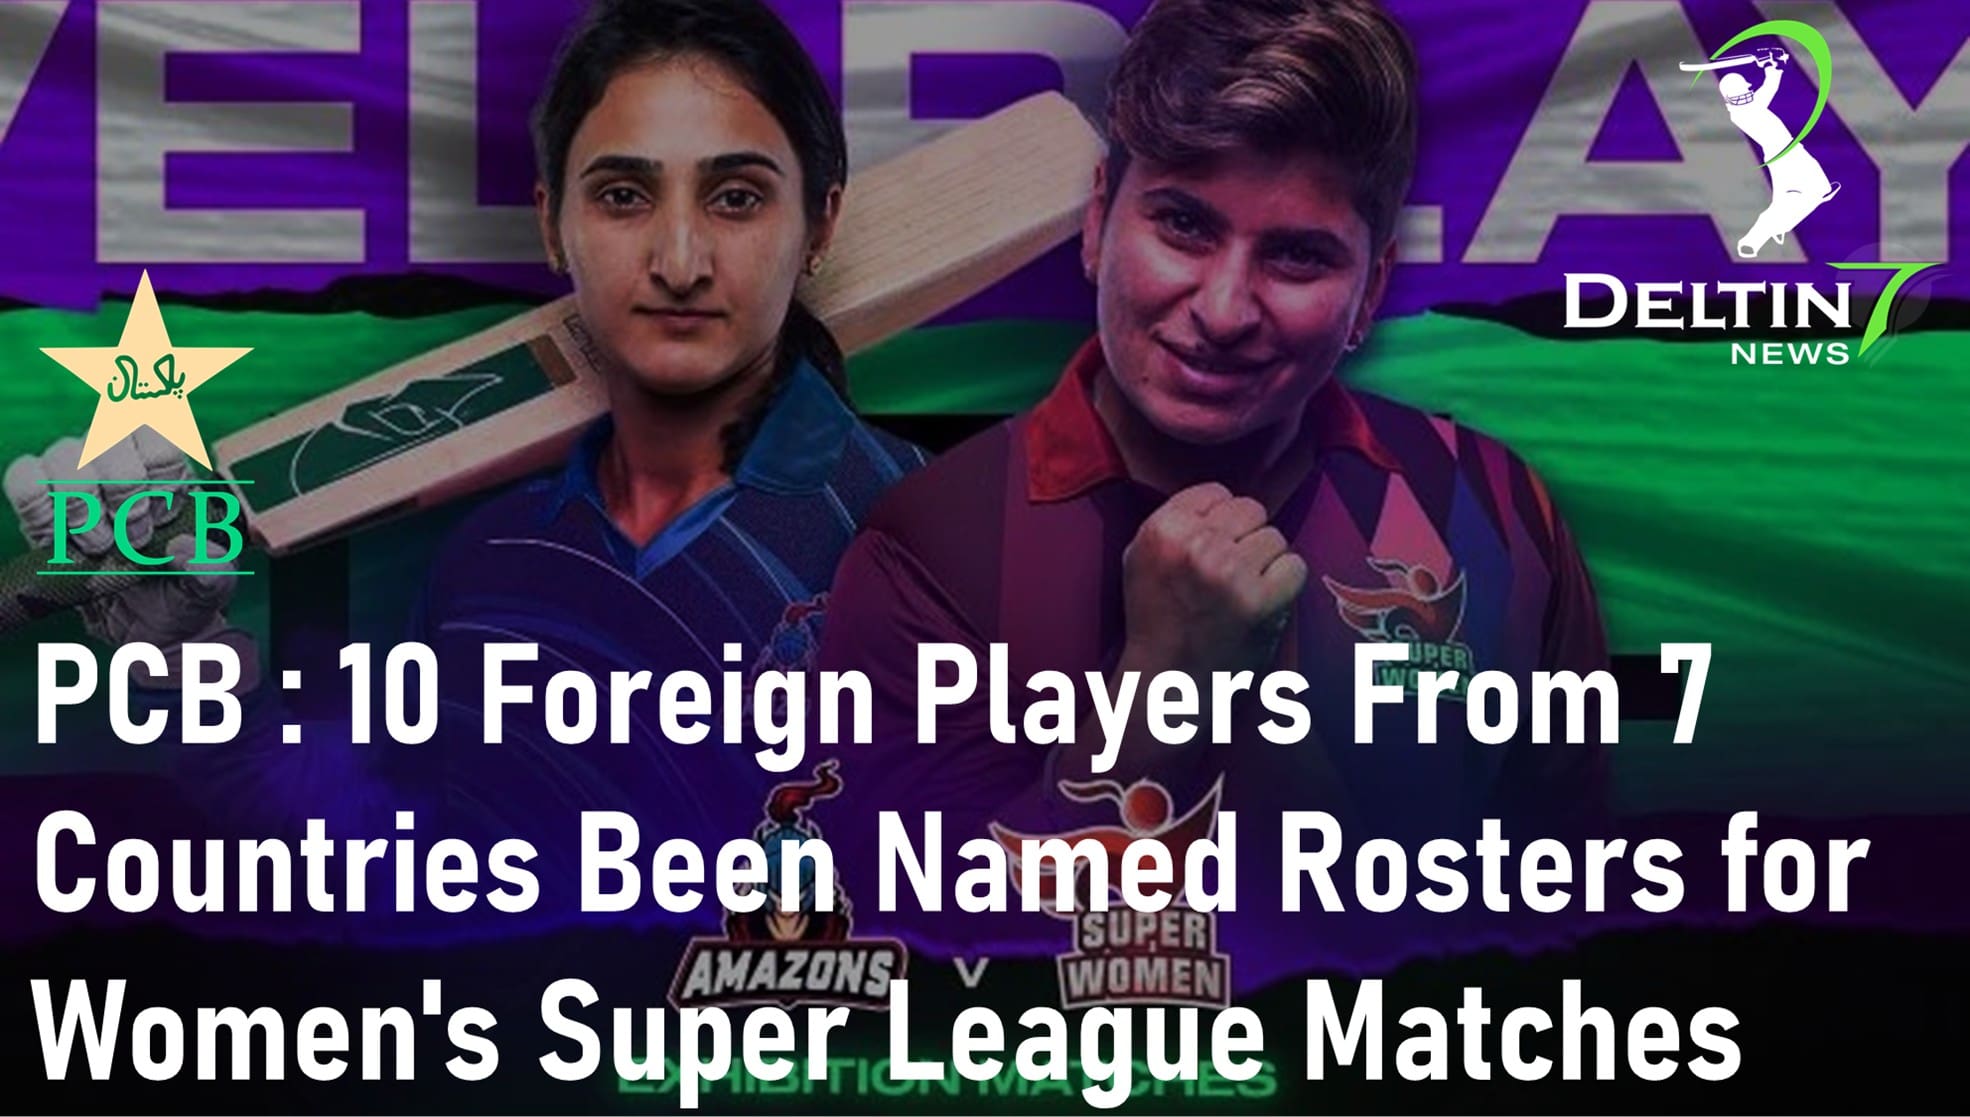 PCB 10 Foreign Players From 7 Countries Been Named Rosters for Women's Super League Matches